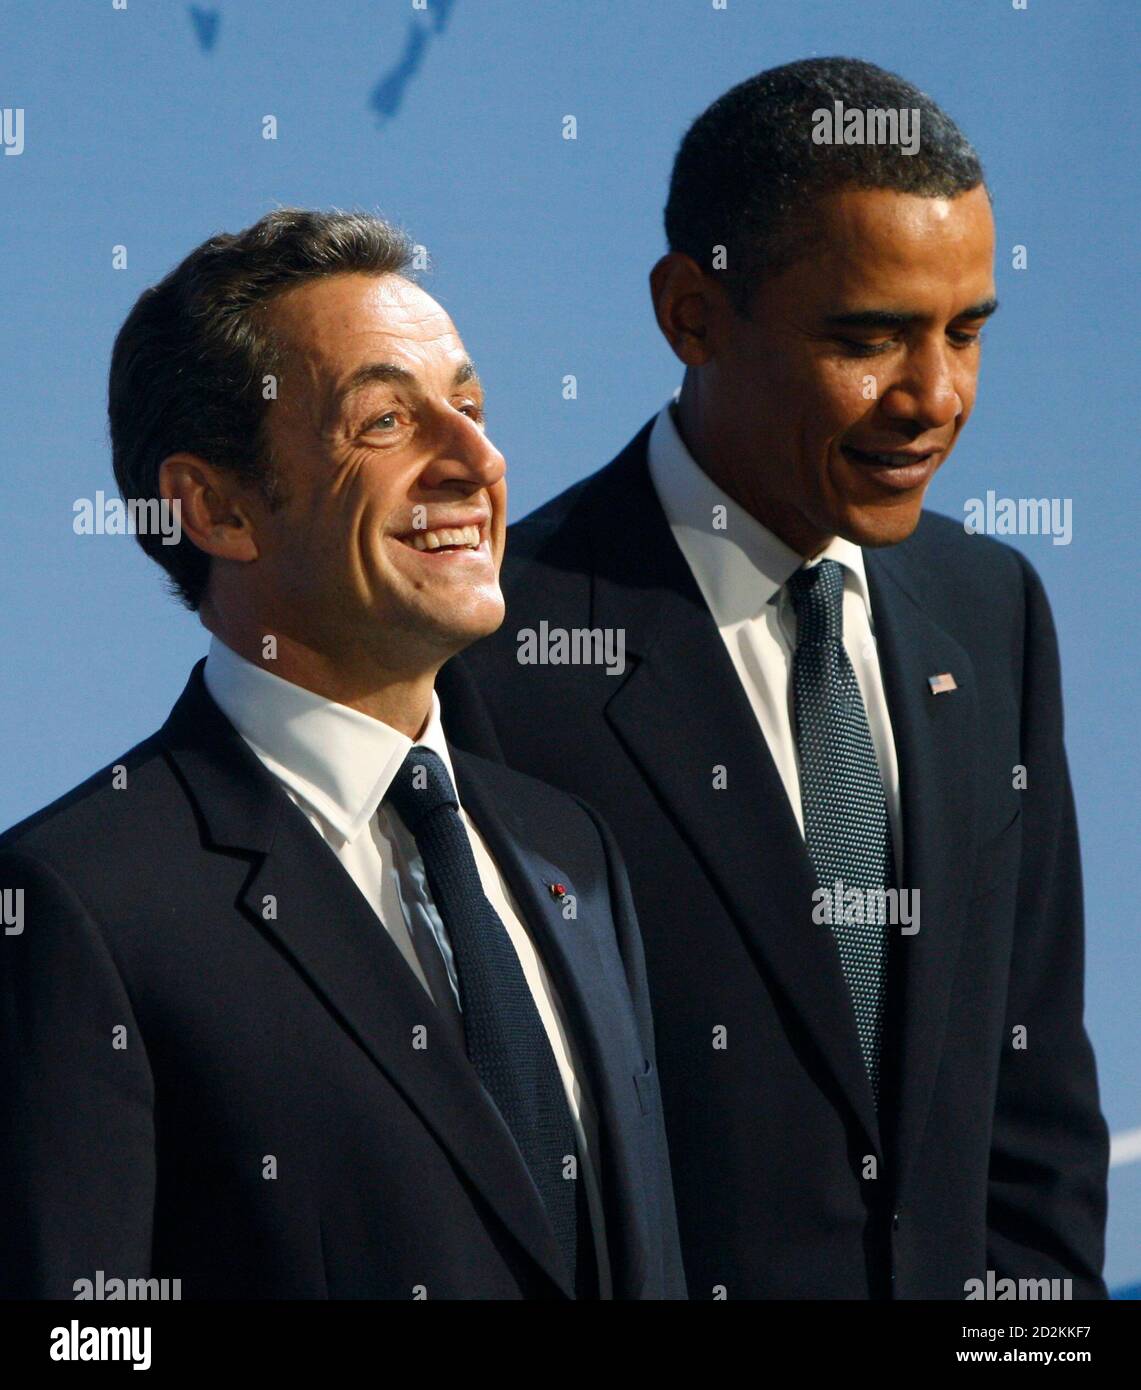 French President Nicolas Sarkozy (L) poses with U.S. President Barack Obama as he arrives at the Phipps Conservatory for an opening reception and working dinner for delegation leaders at the Pittsburgh G20 Summit in Pittsburgh, Pennsylvania September 24, 2009. REUTERS/Chris Wattie (UNITED STATES POLITICS) Stock Photo